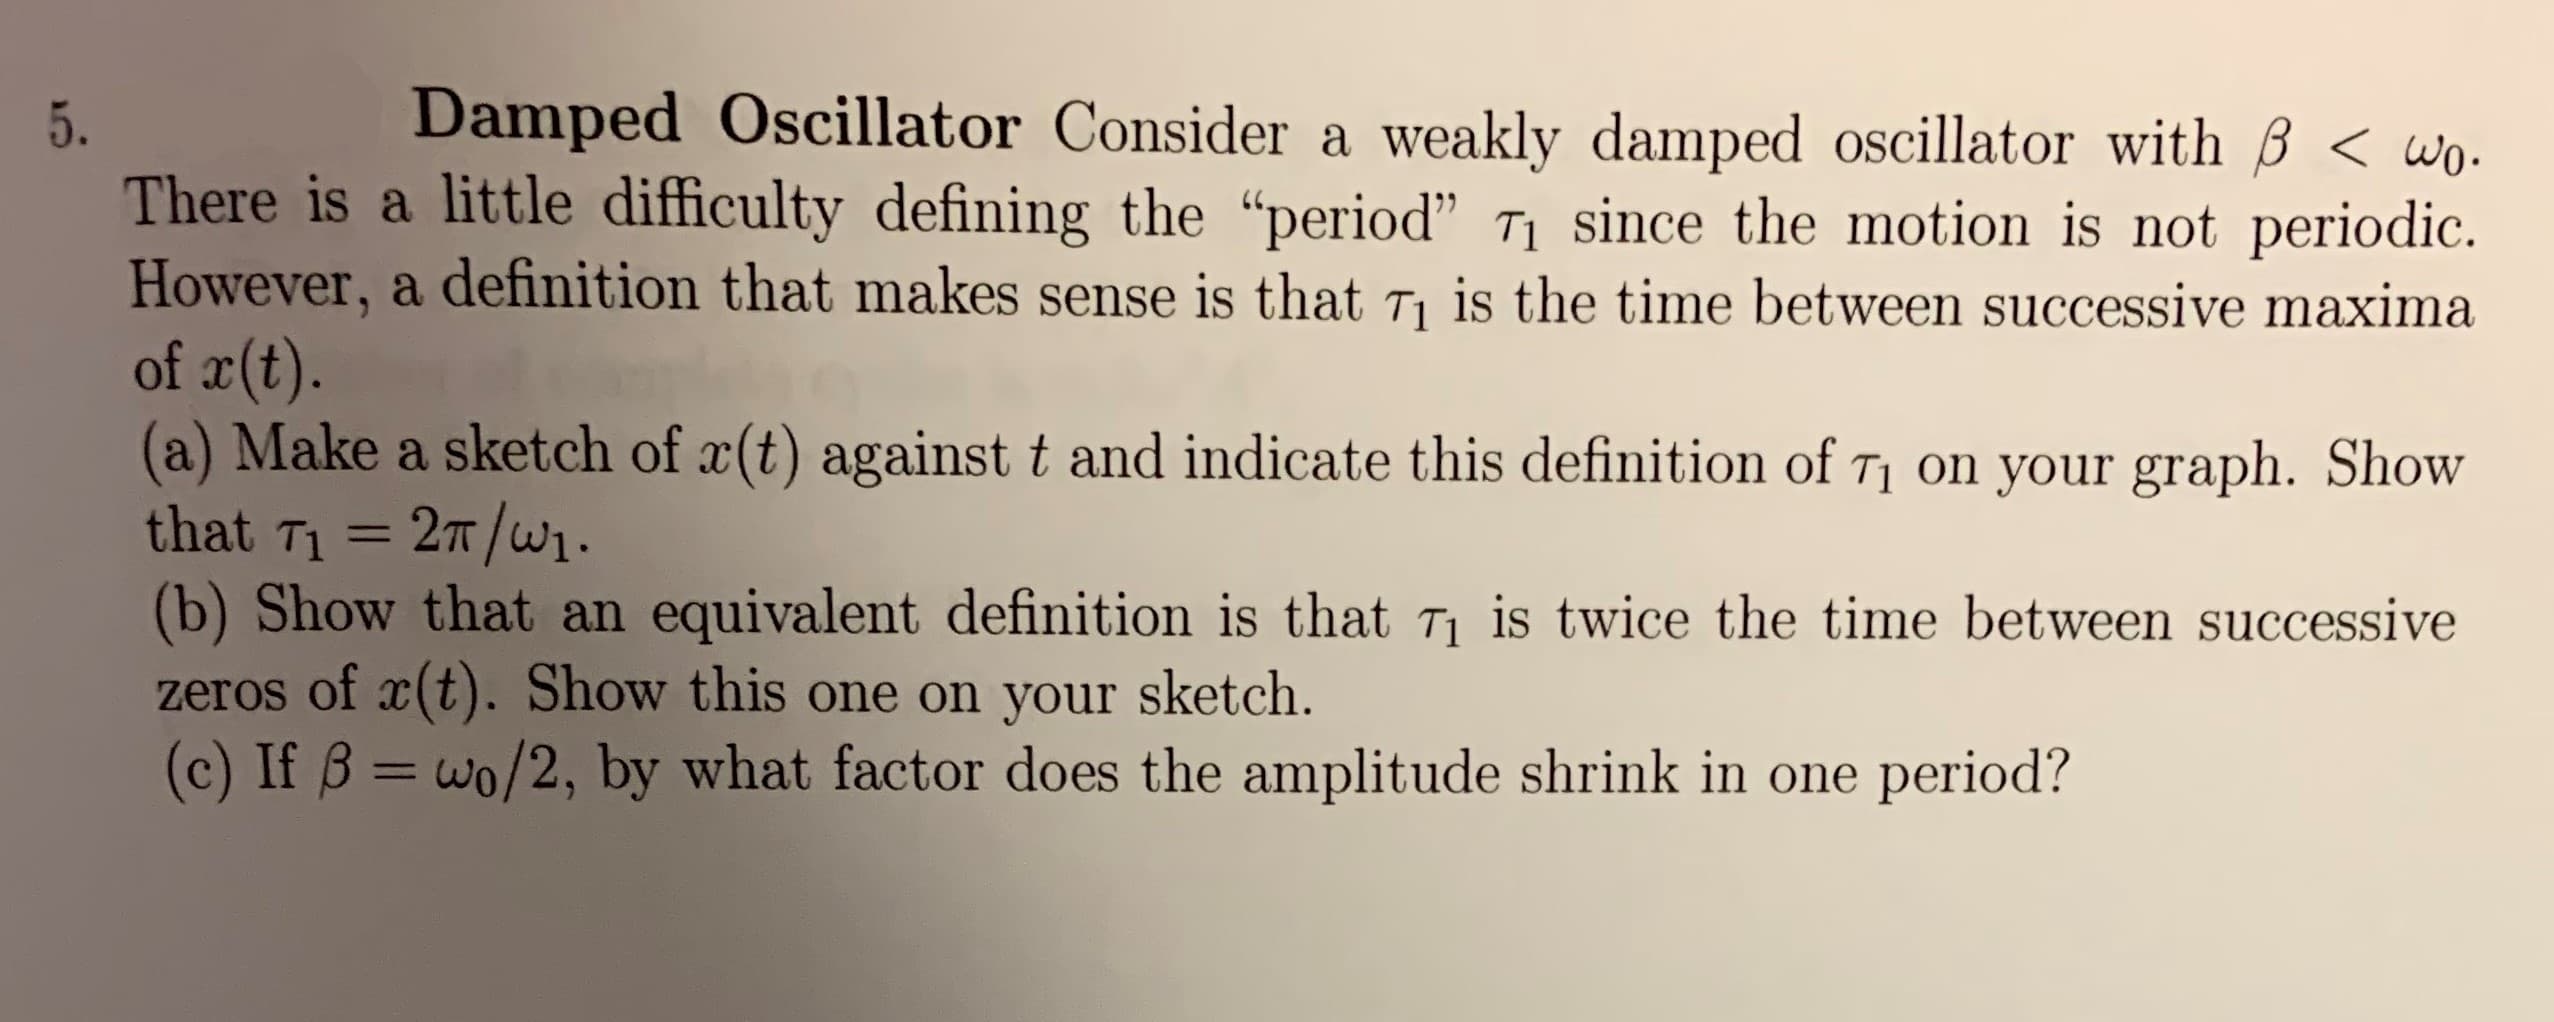 Damped Oscillator Consider a
5.
weakly damped oscillator with B < wo.
There is a little difficulty defining the "period" Ti since the motion is not periodic
However, a definition that makes sense is that T1 is the time between successive maxima
of r(t)
(a) Make a sketch of x(t) against t and indicate this definition of T1 on your graph. Show
that T1 27T/w1
(b) Show that an
zeros of xt). Show this one on your sketch.
(c) If B = wo/2, by what factor does the amplitude shrink in one period?
equivalent definition is that Ti is twice the time between successive
11
